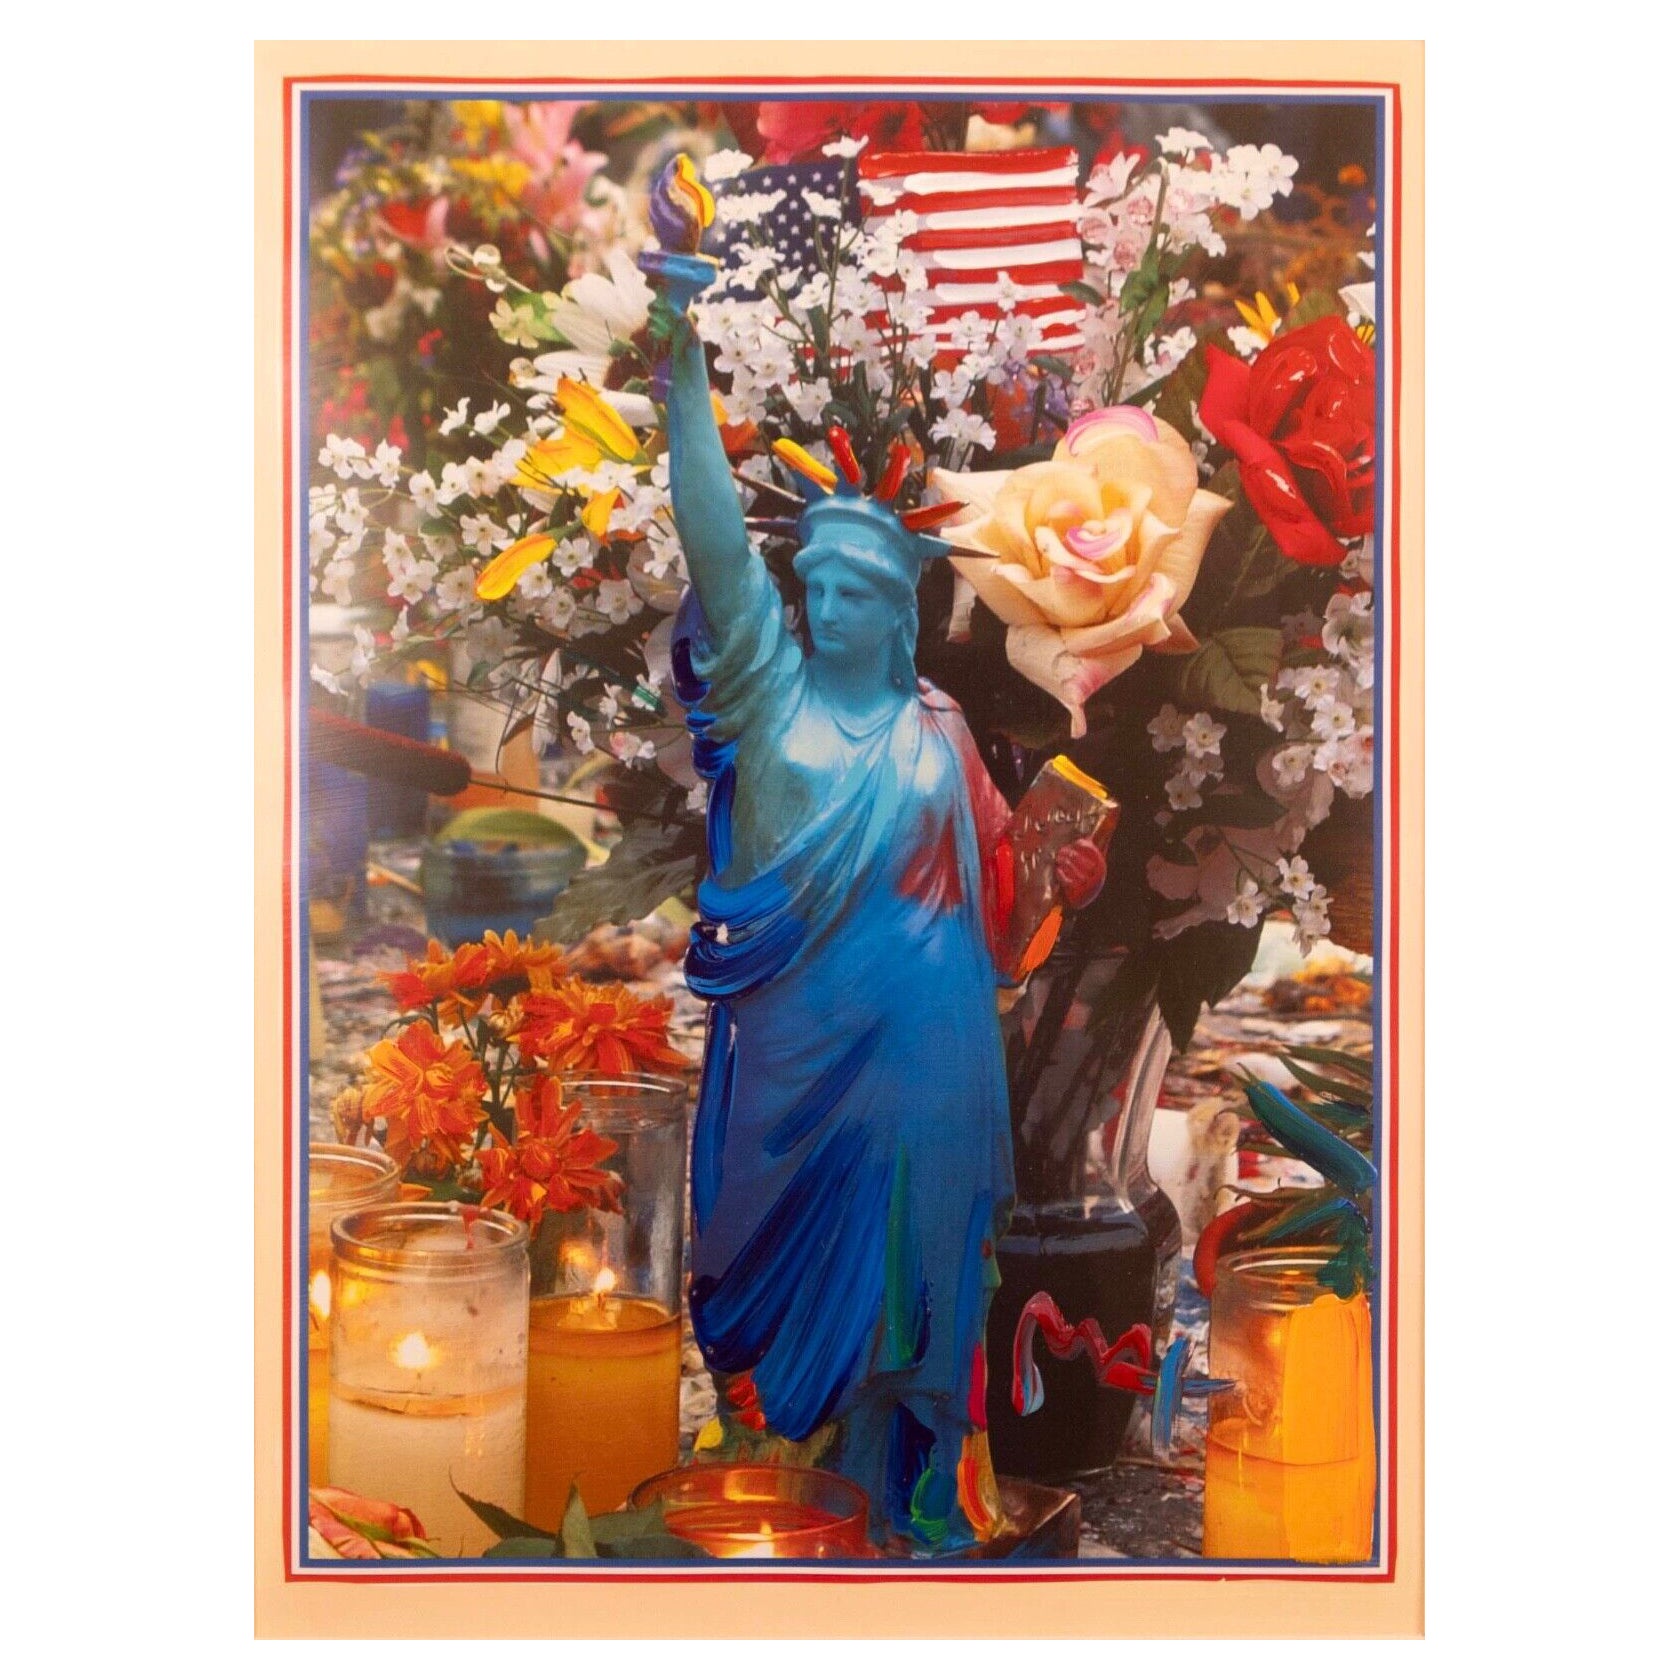 Peinture acrylique « Land of Free Home of the Brave » signée Peter Max,01